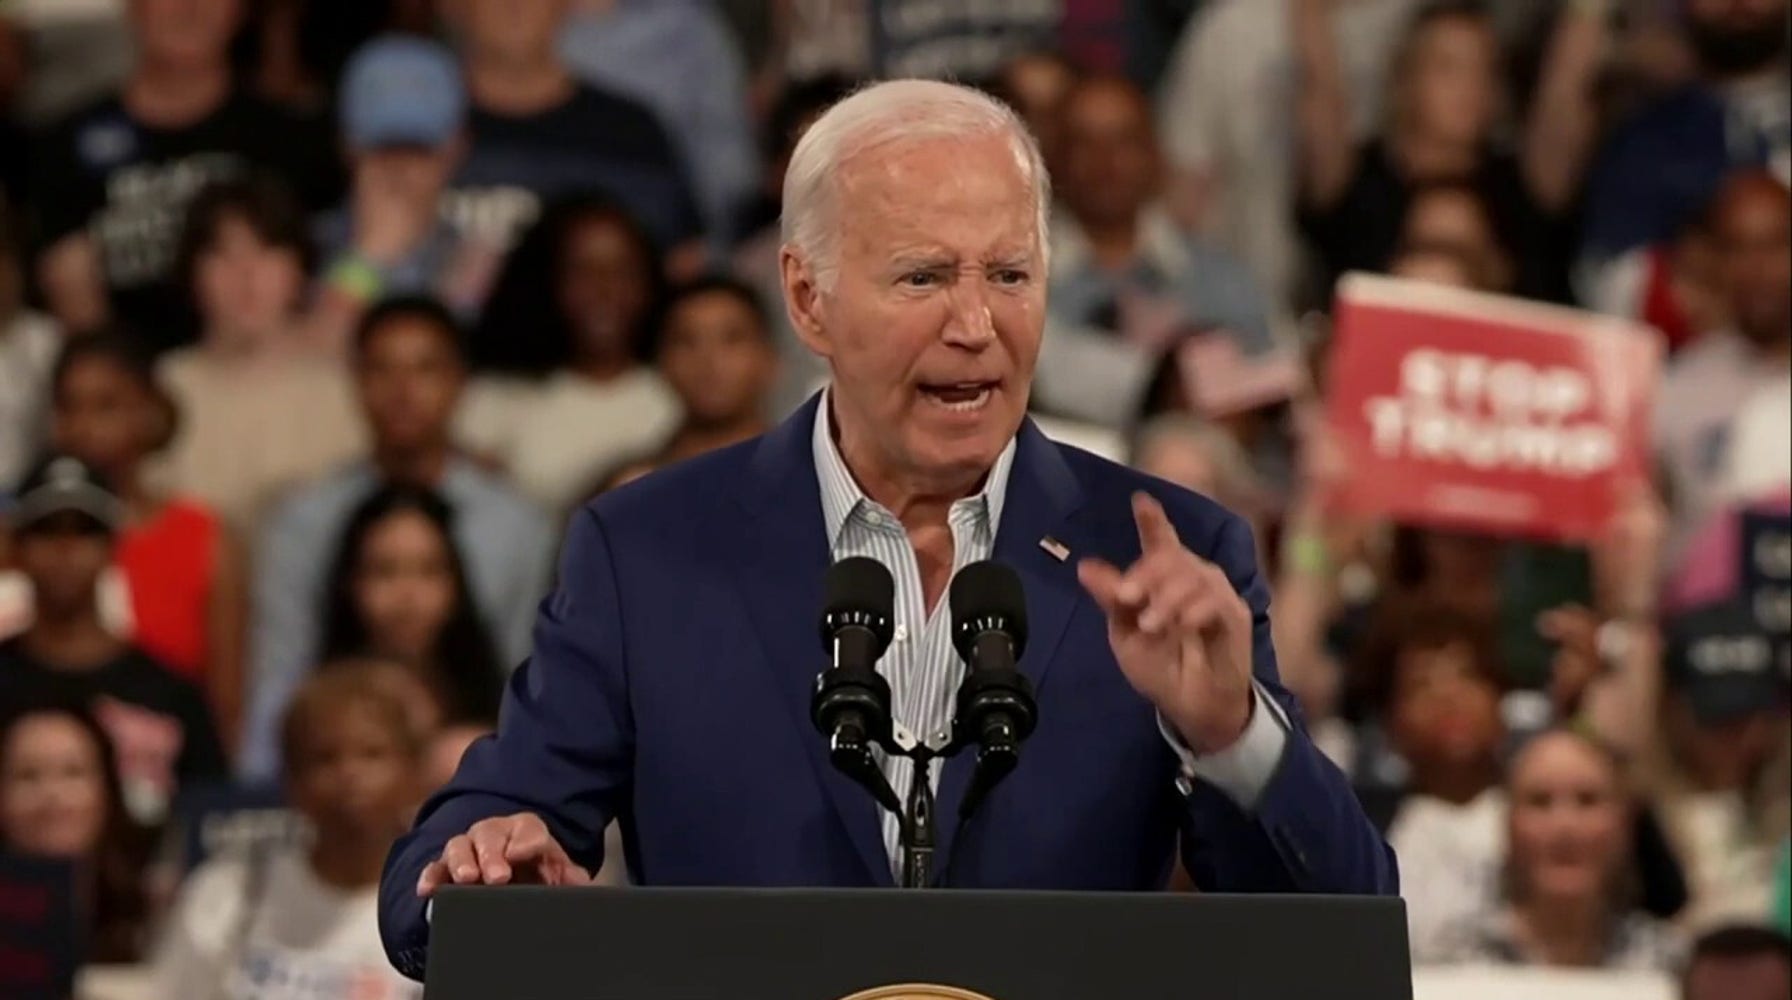 Biden Defends Debate Performance, Vows to Win NC and White House